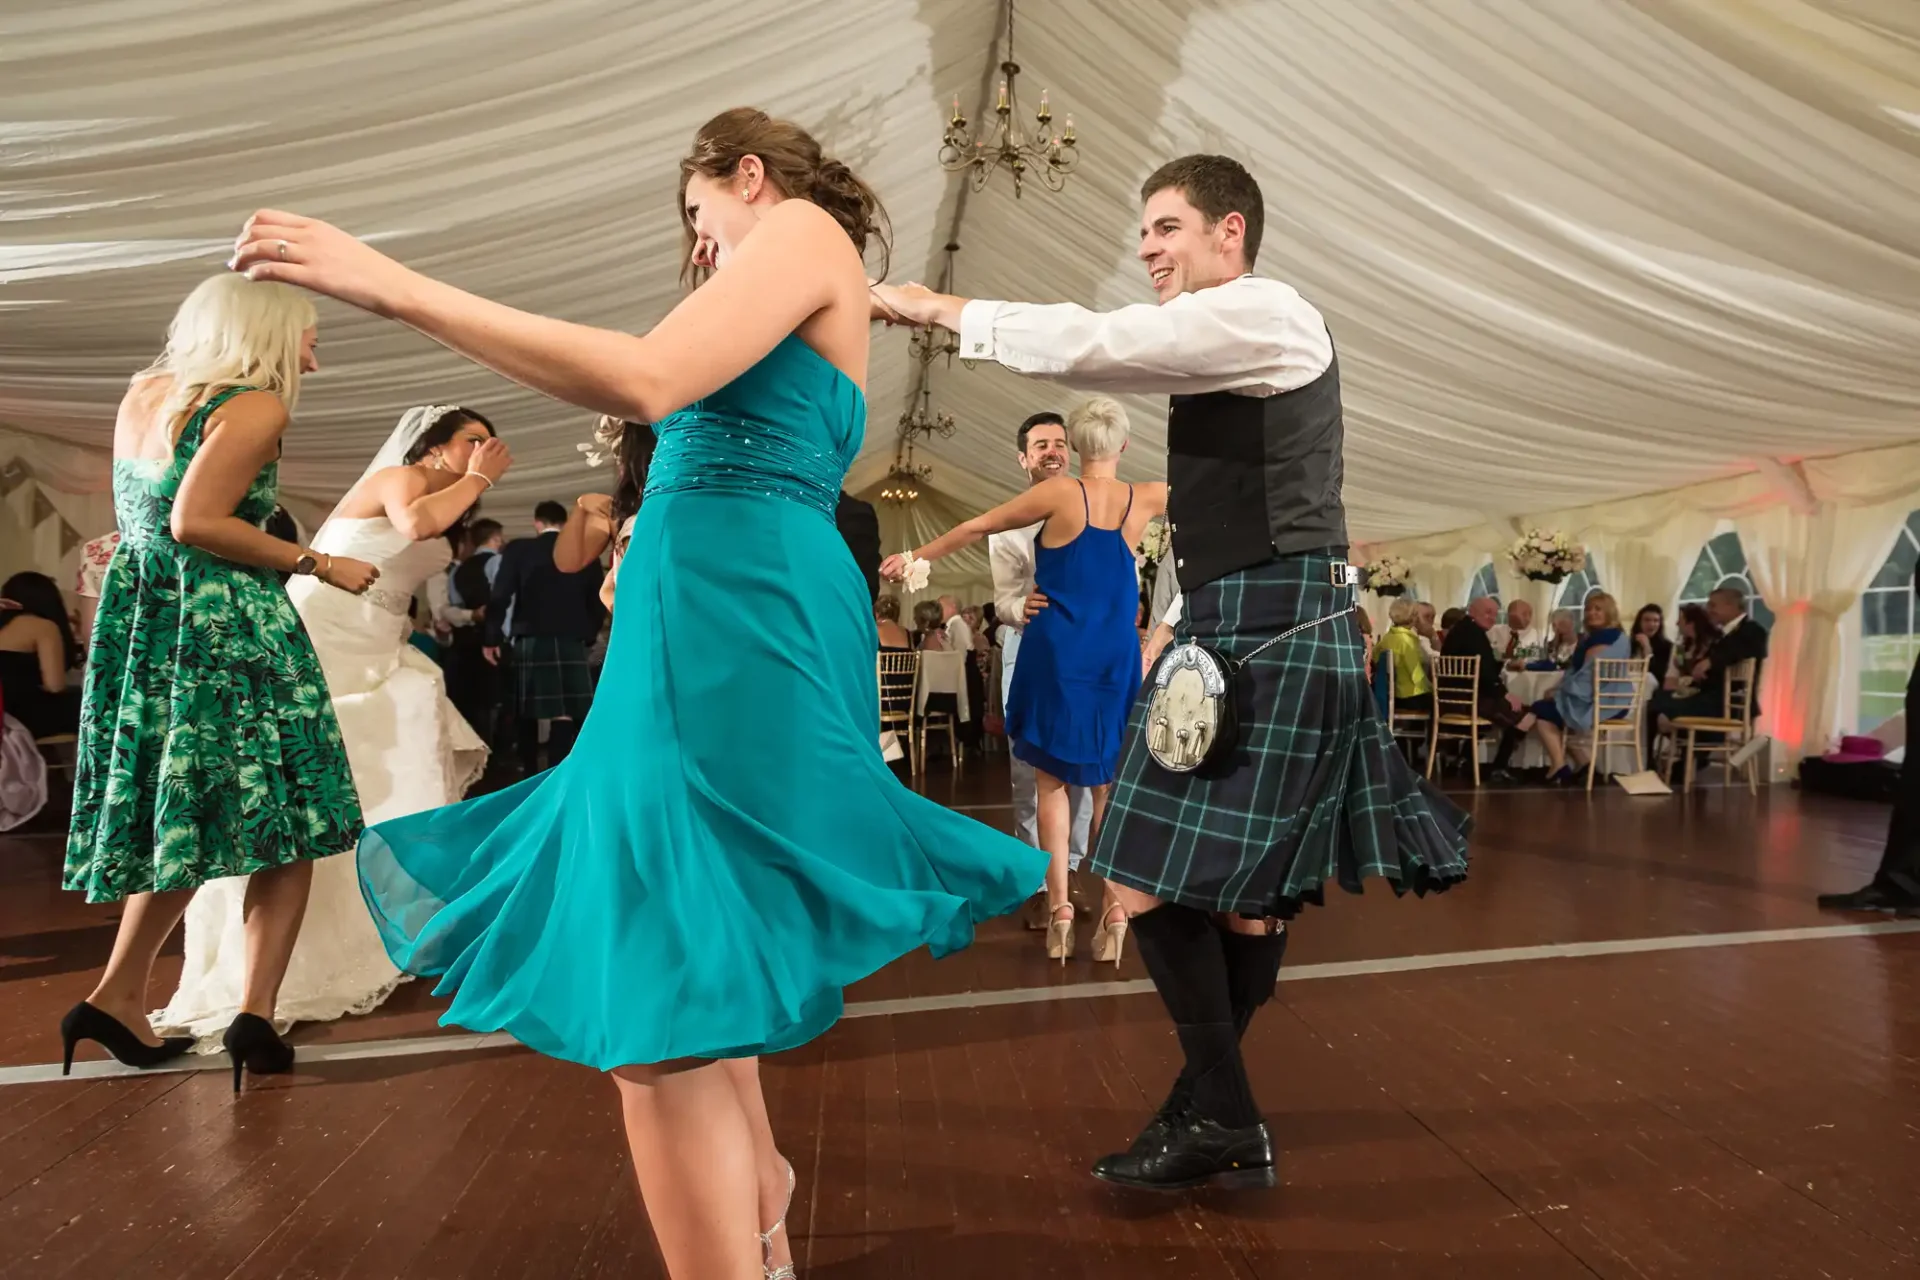 A couple dancing in a marquee, the woman in a teal dress and the man in a kilt, with guests seated in the background.